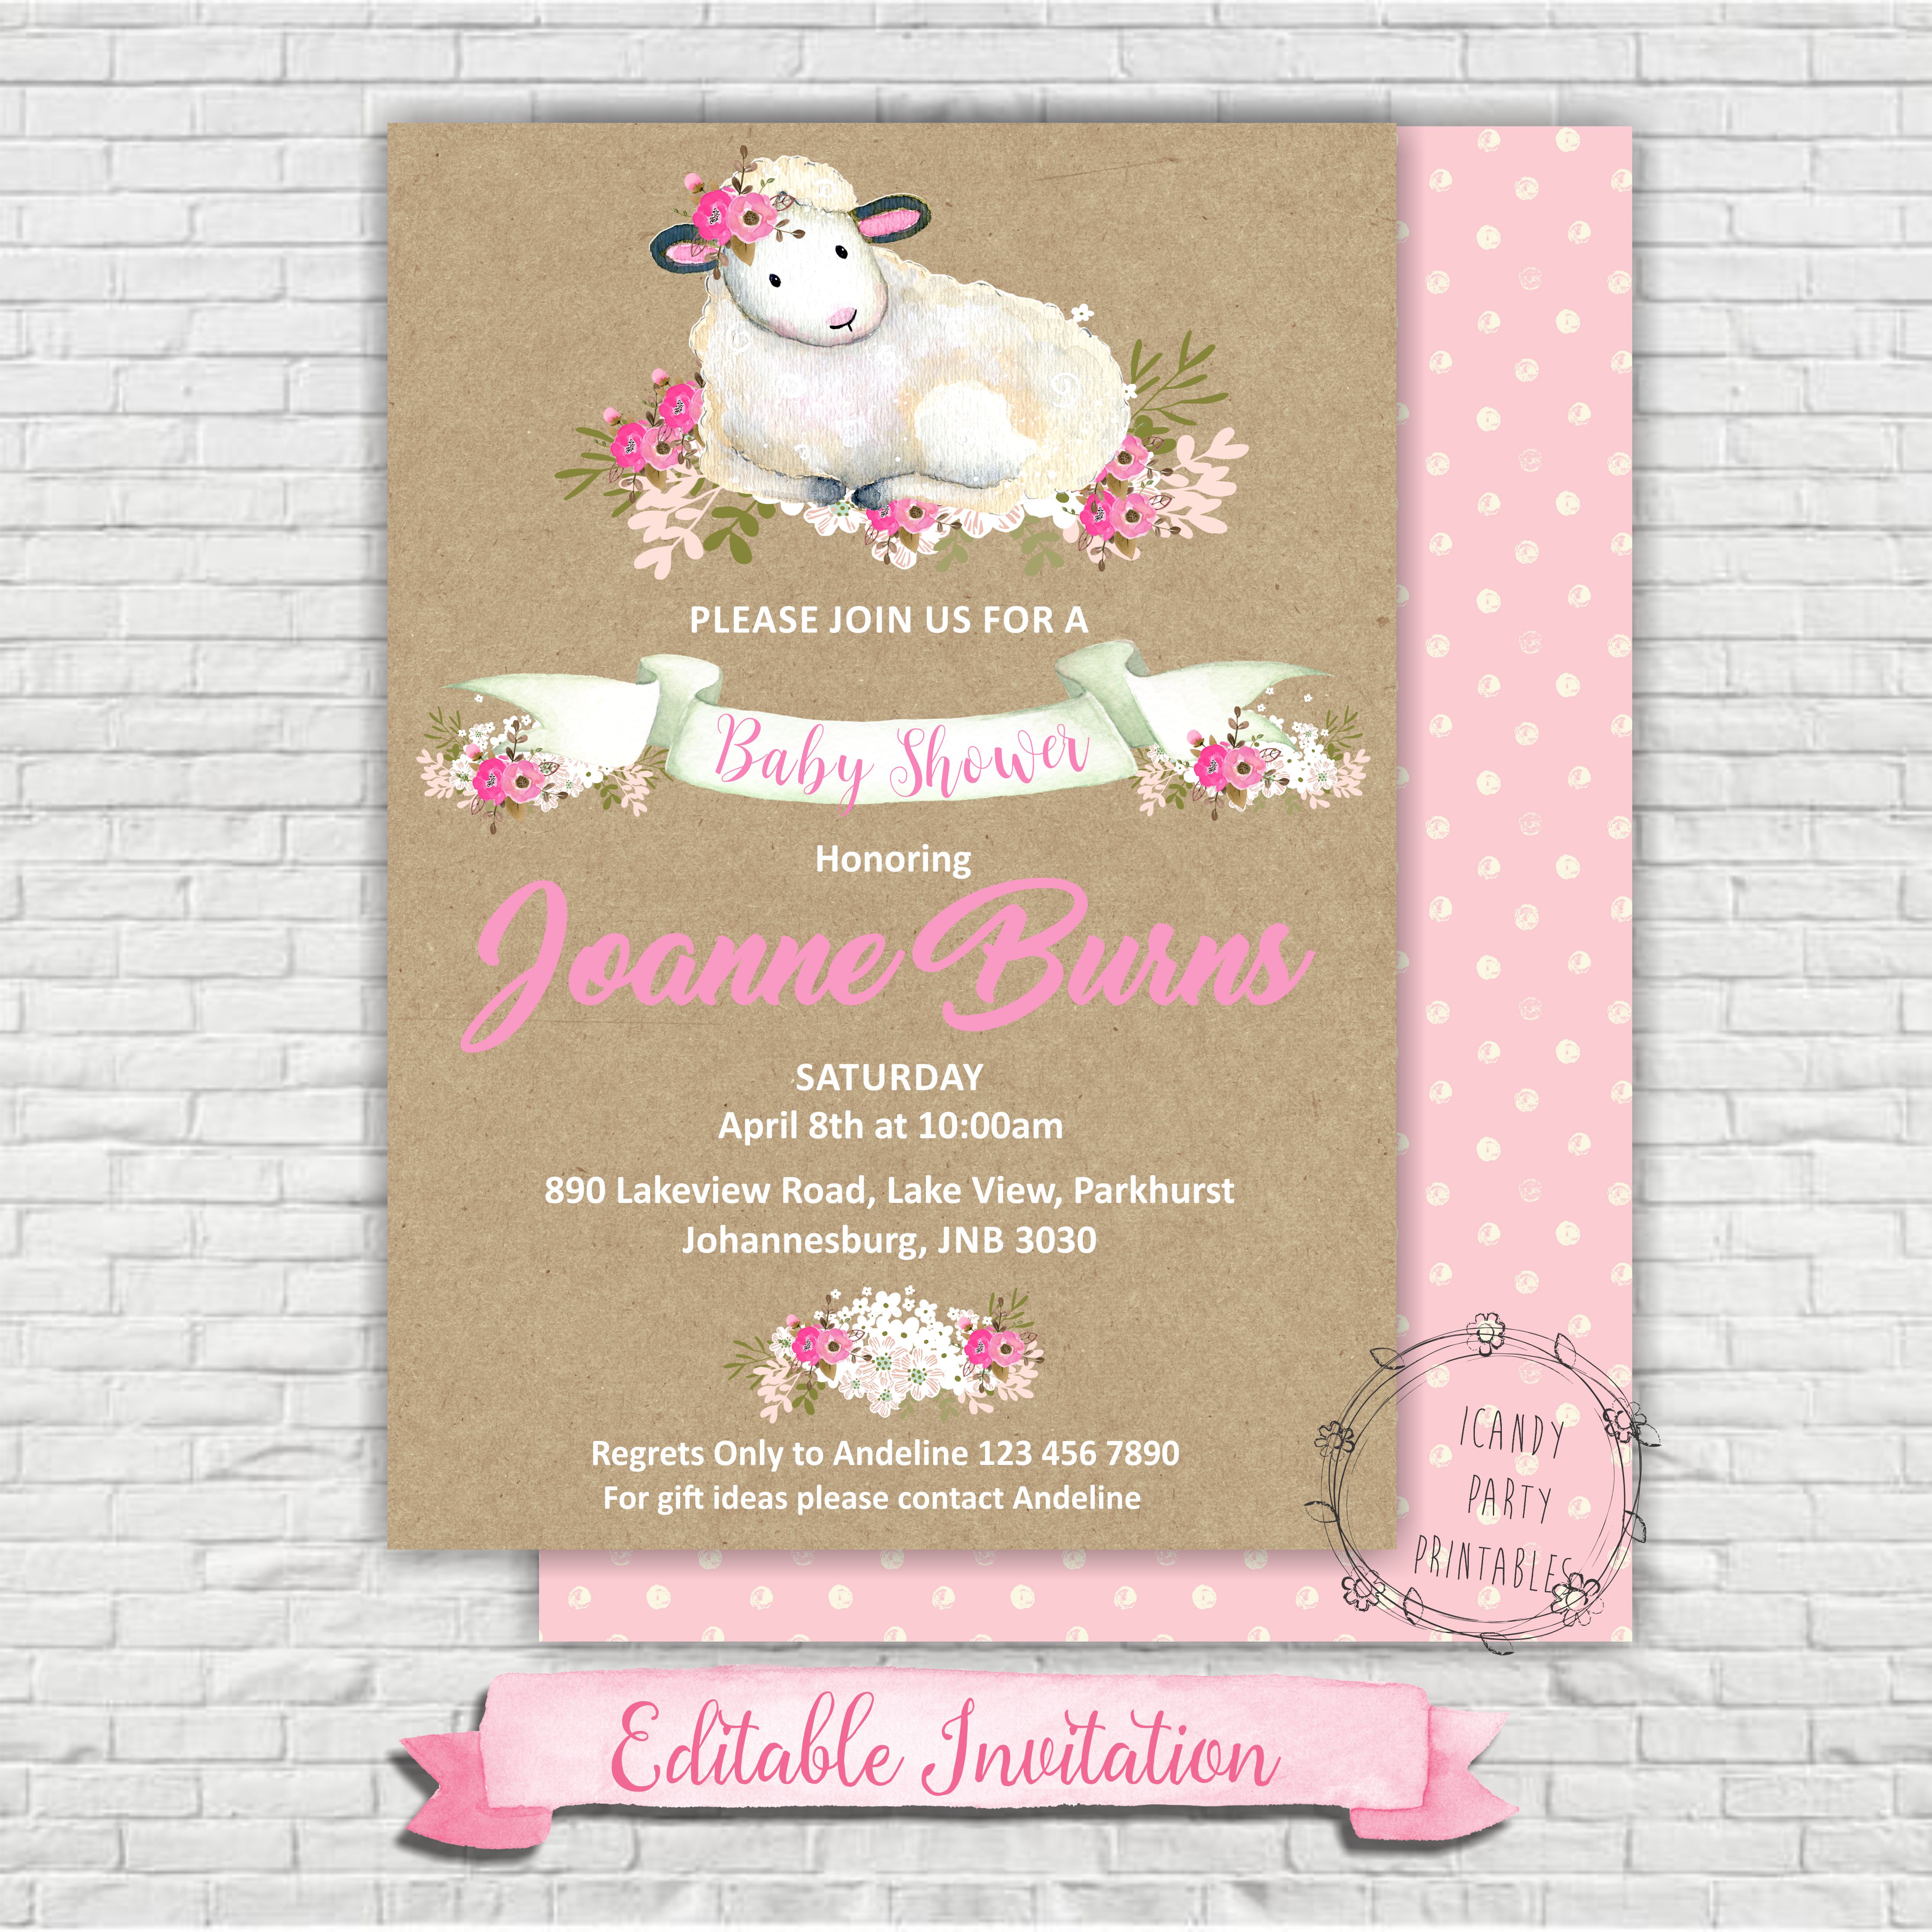 Full Size of Baby Shower:nursery Themes For Girls Baby Girl Party Plates Girl Baby Shower Decorations Baby Shower Decorations For Girls Baby Shower Card Message Ideas Baby Girl Party Plates Baby Shower Invitations Baby Shower Favors